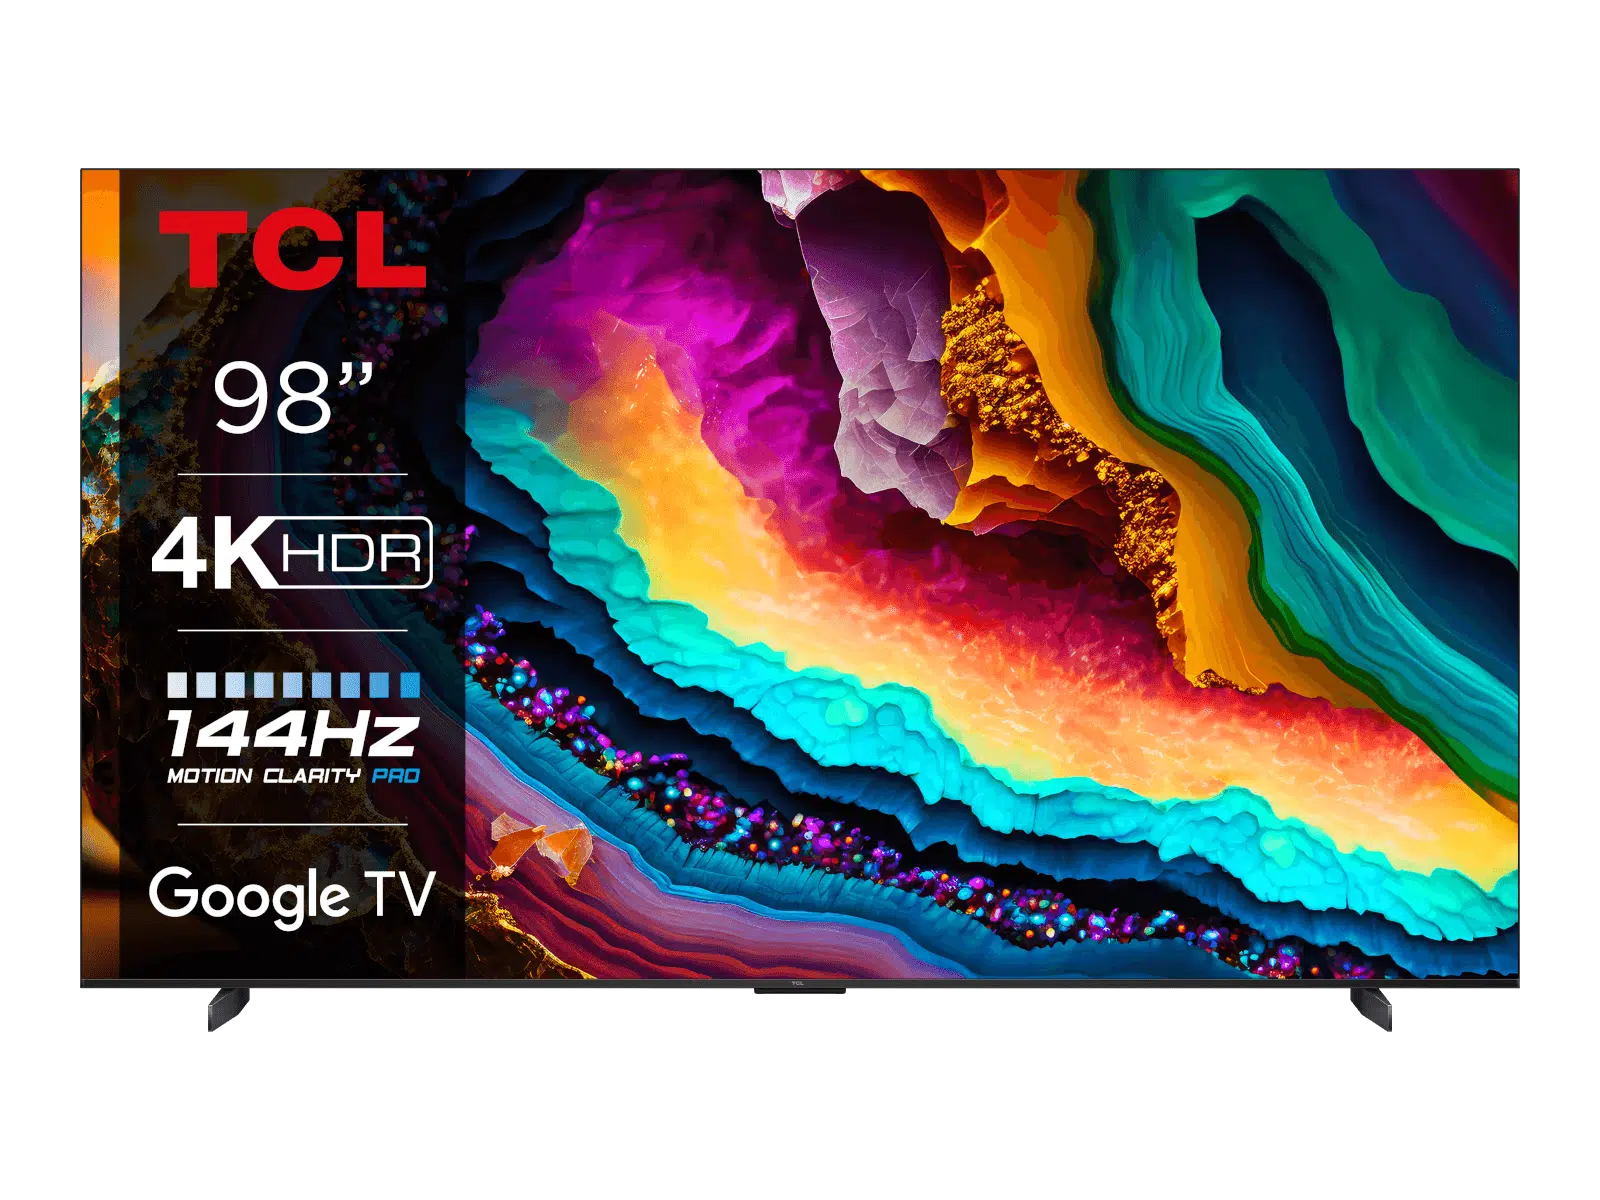 TCL Smart Television